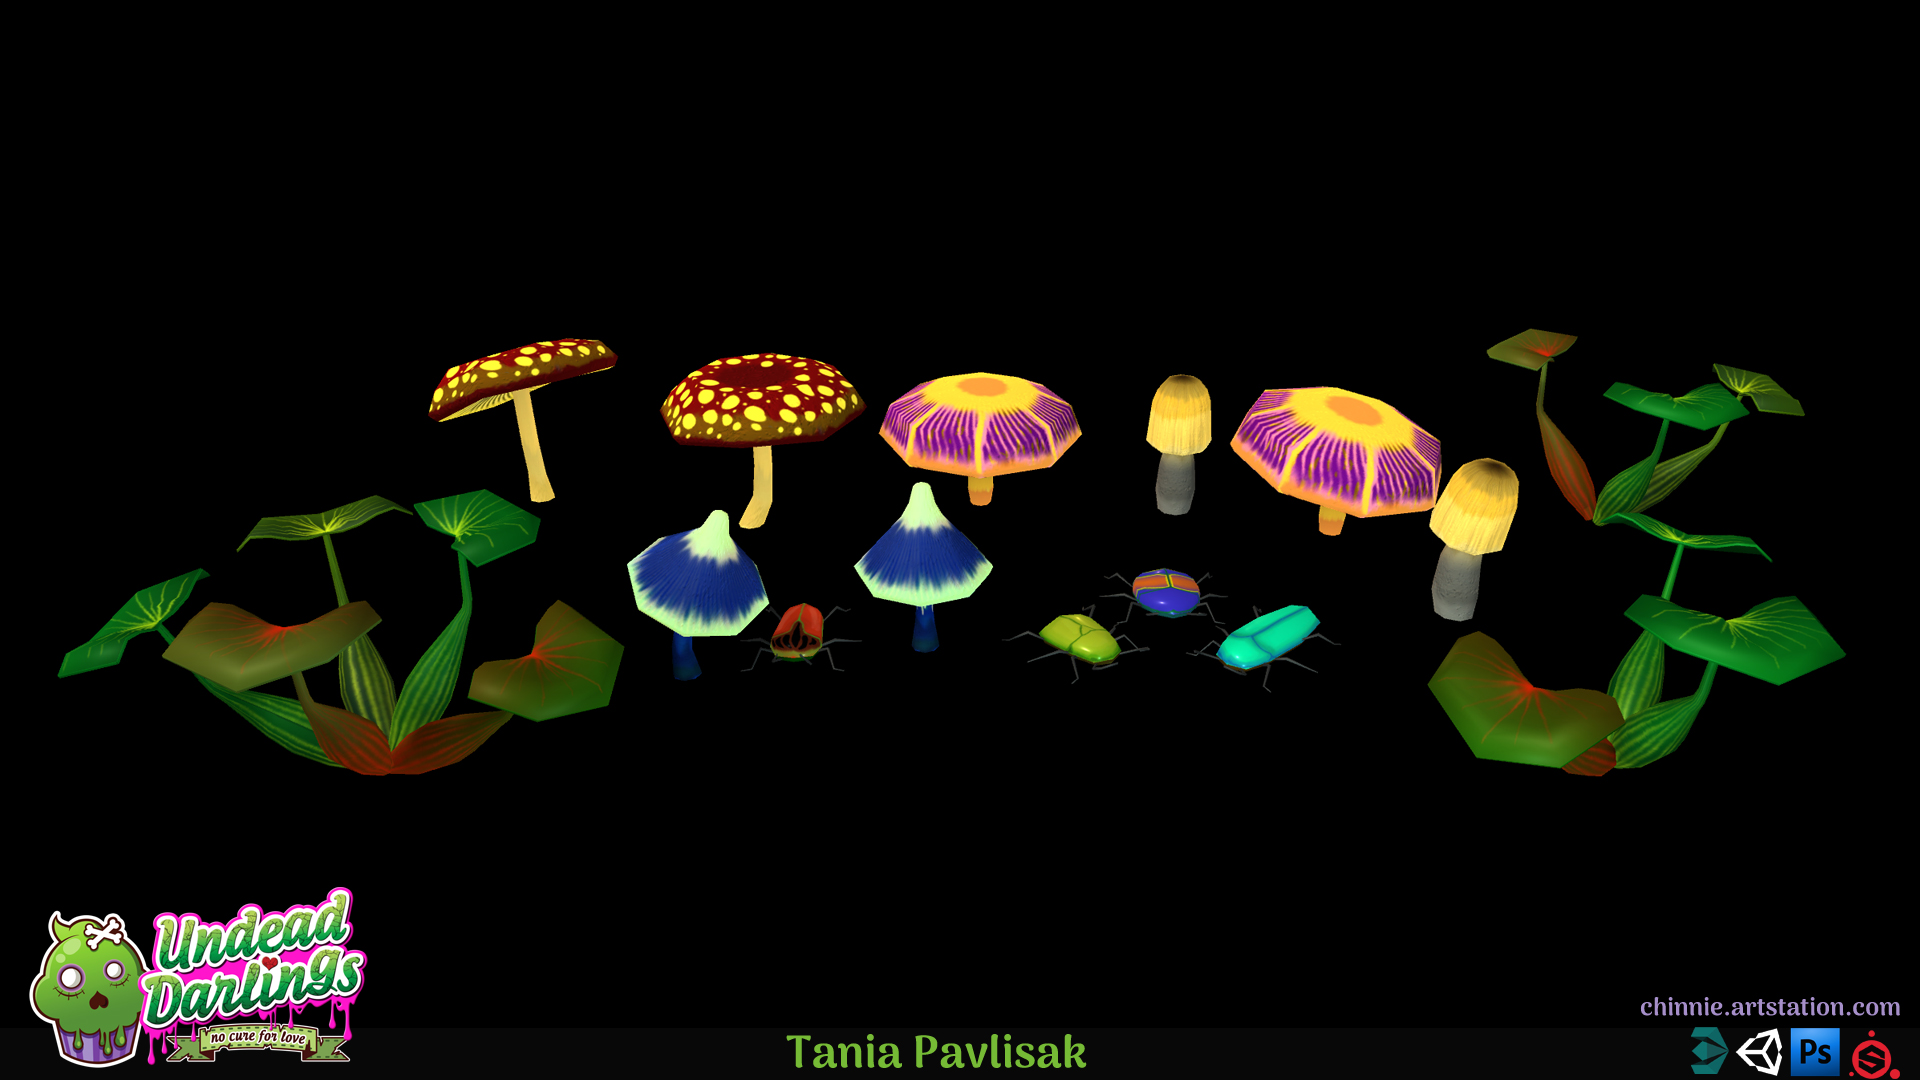 Some glowing mushrooms, bugs and hyacinth plants to brighten up the gloomy sewer level.